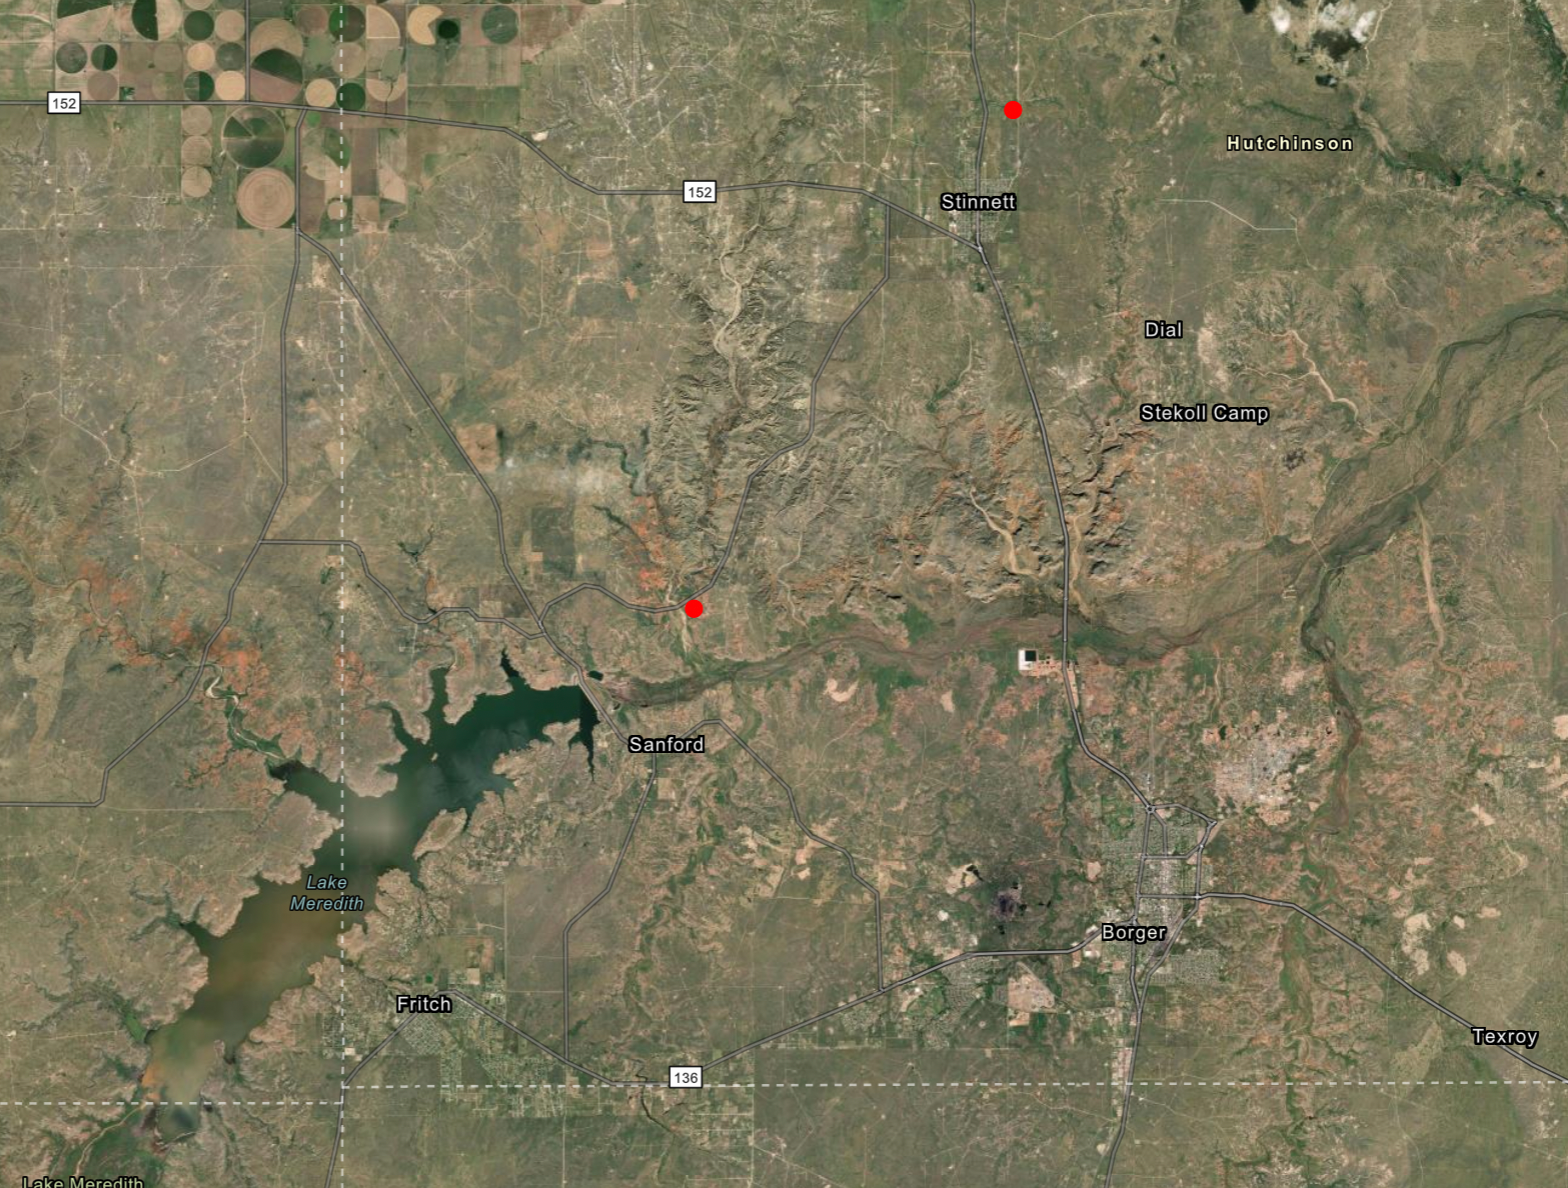 The Smokehouse Creek and 687 Reamer fires are burning in Hutchinson County